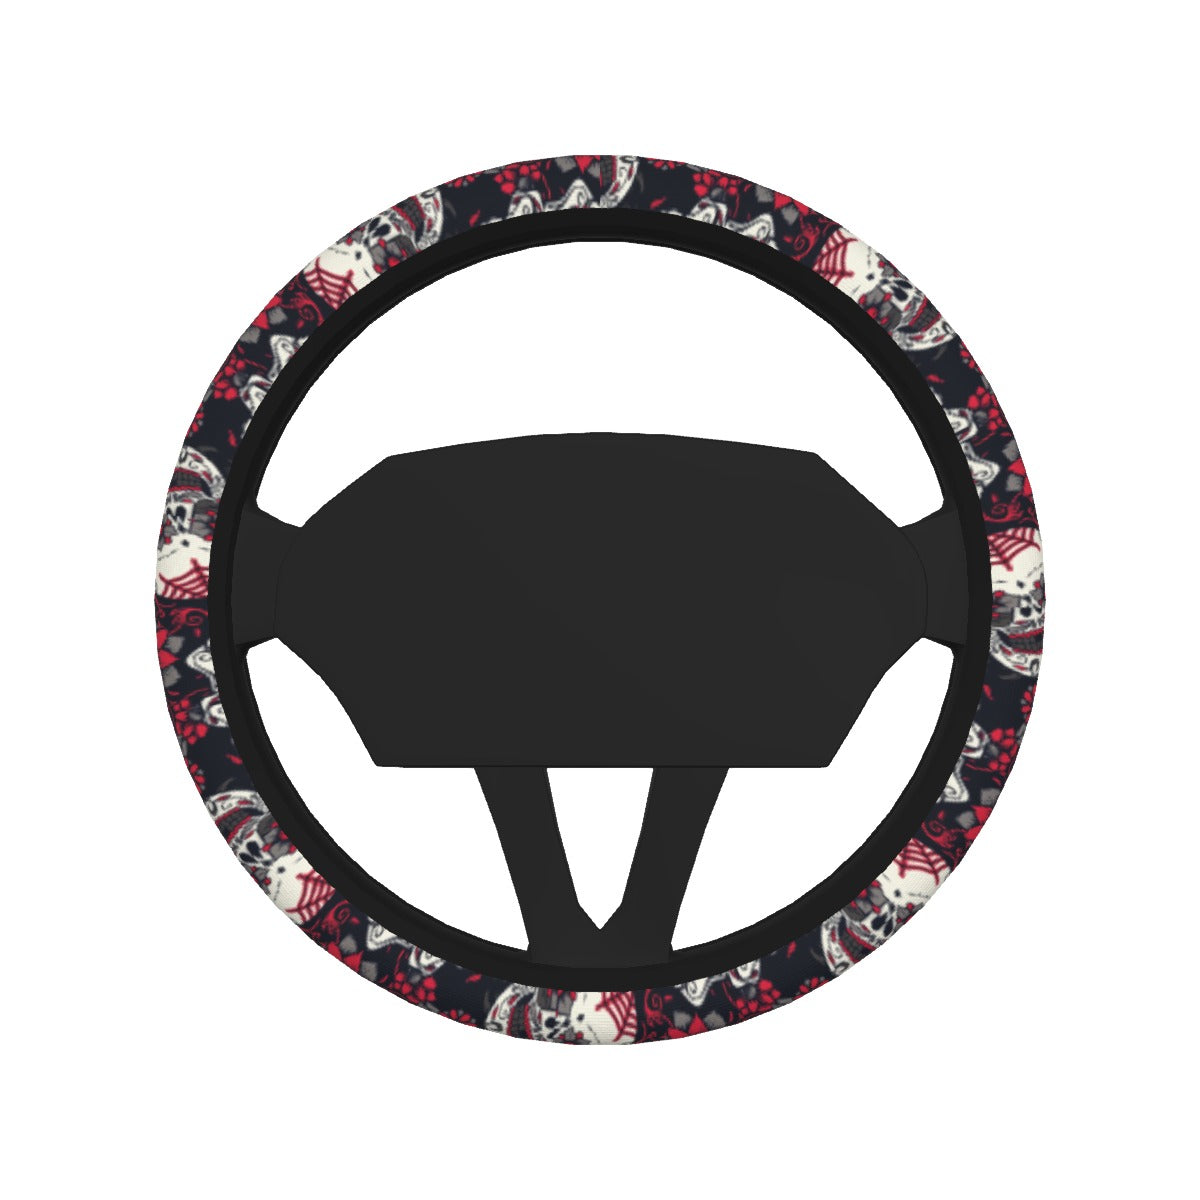 Gothic skull Steering Wheel Cover, Floral sugar skull car accessories steering wheel cover